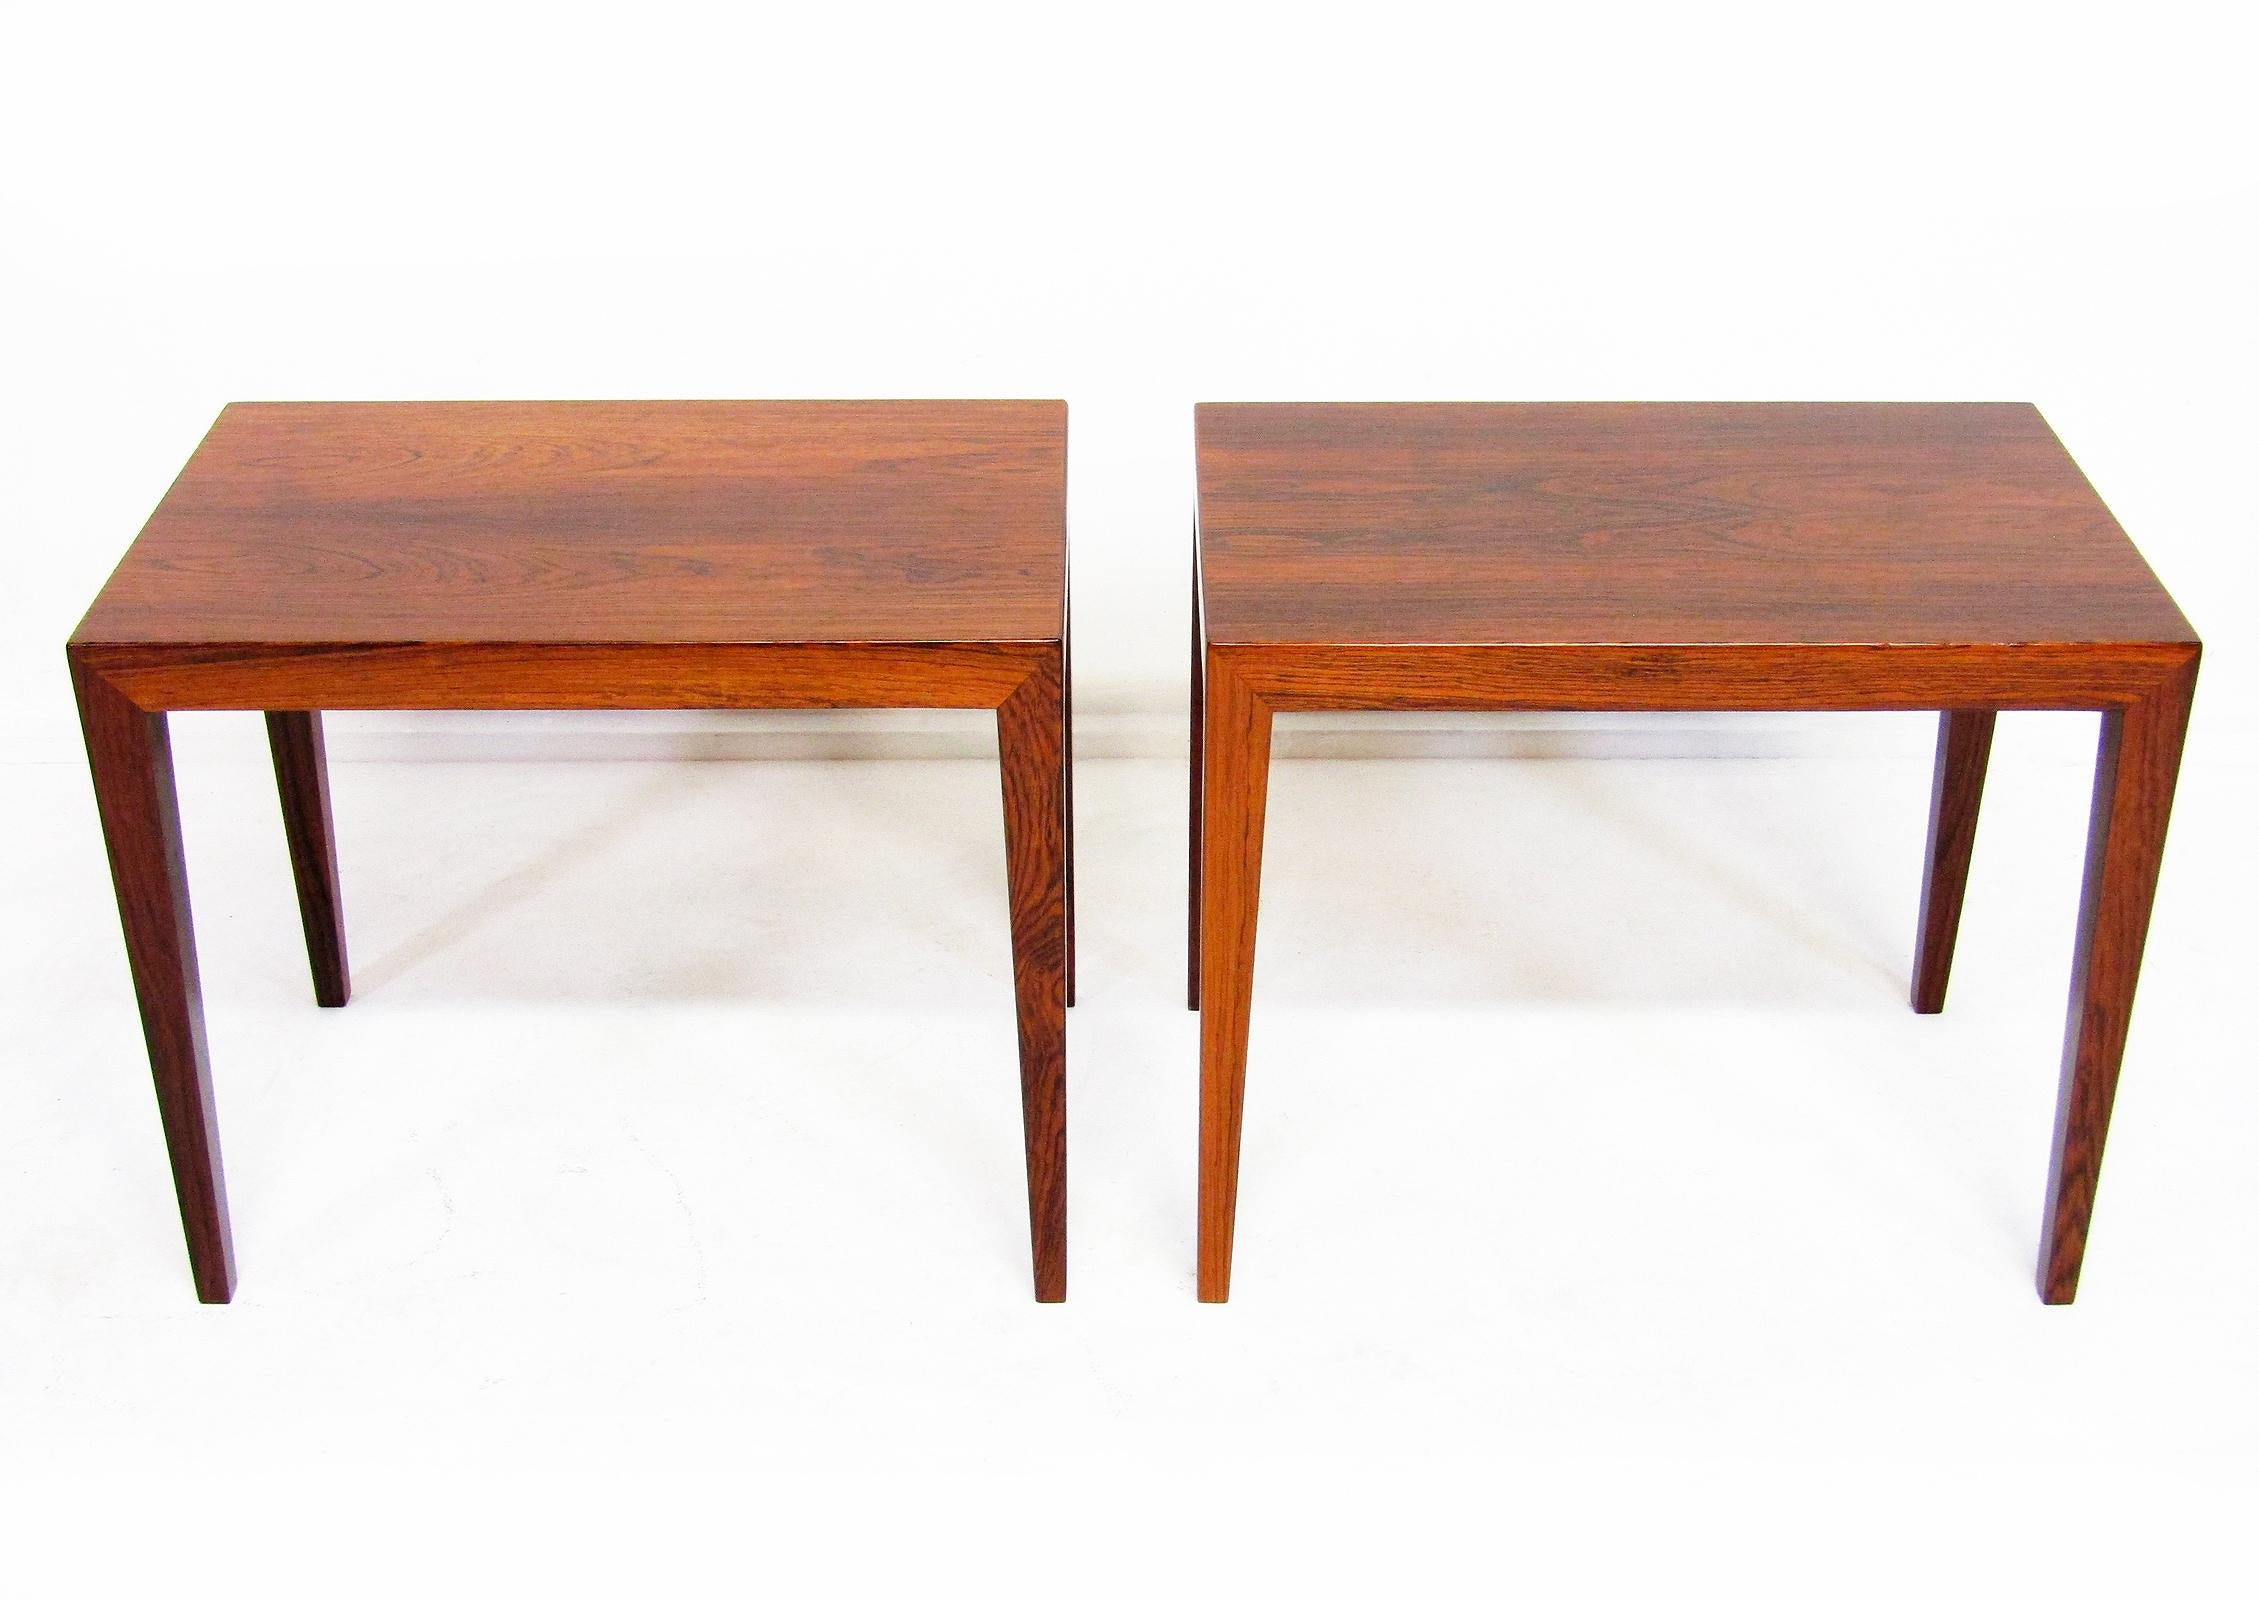 A pair of rosewood lamp tables by Severin Hansen for Danish manufacturer Haslev.

With clean lines, tapered legs and Hansen's signature mitered joints these tables are excellent for lamp or bedside use.

The craftsmanship is second to none. They are